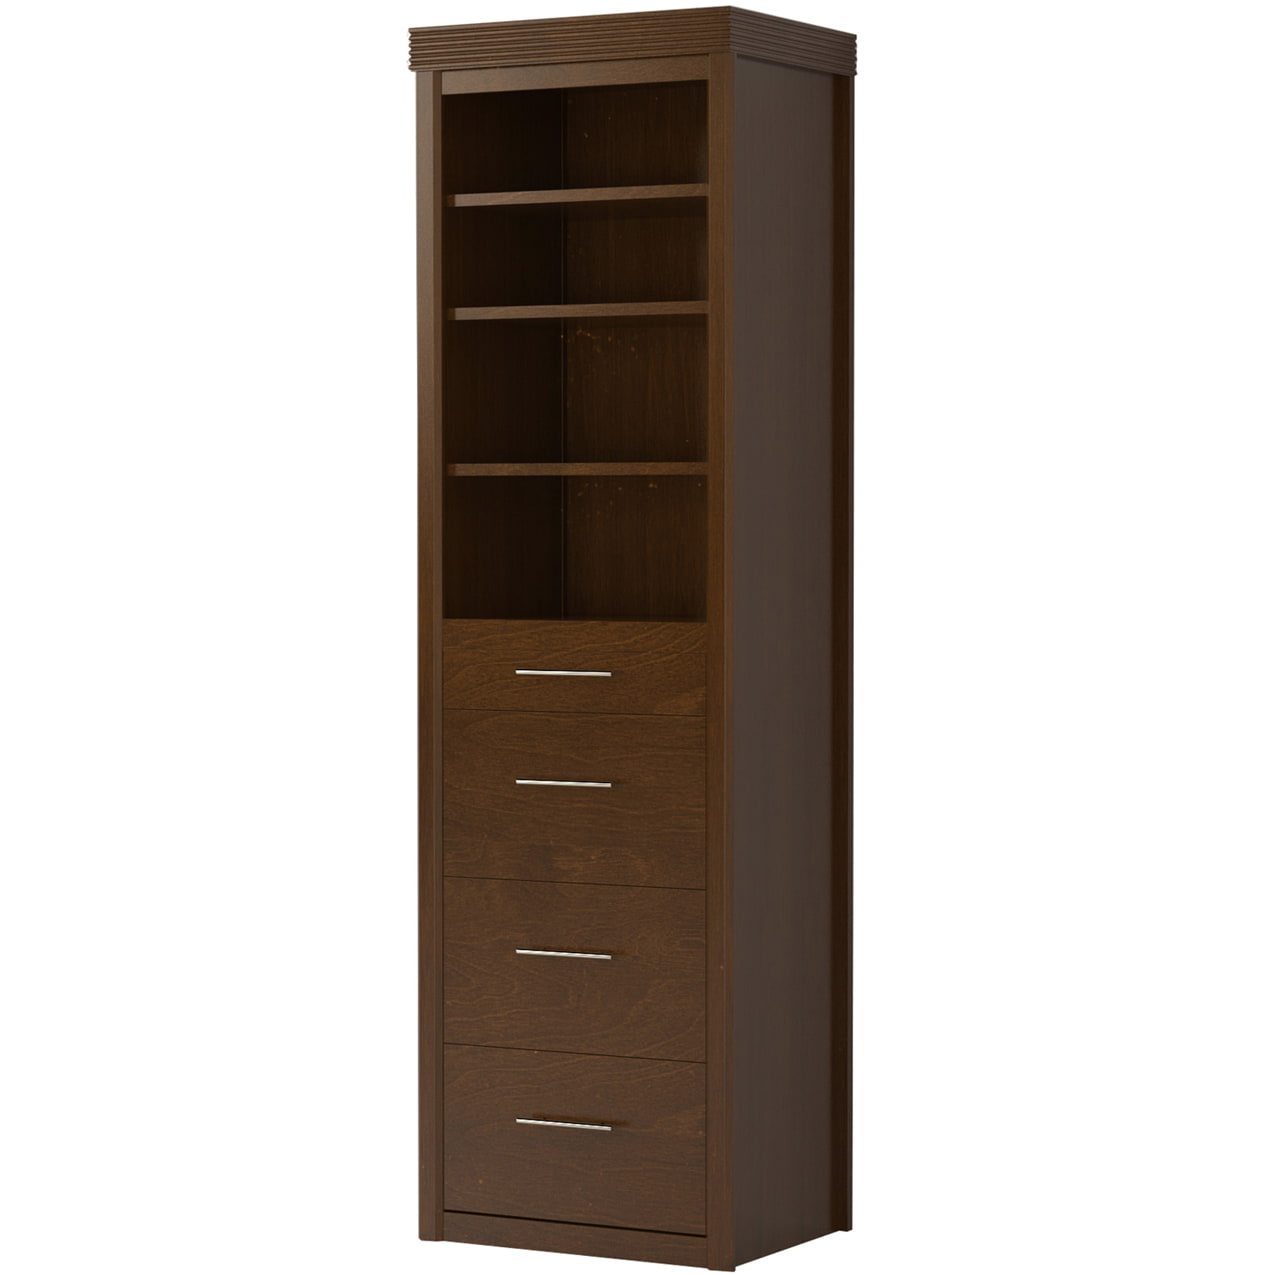 Coventry customizable storage cabinet with adjustable shelves pullout nightstand drawers